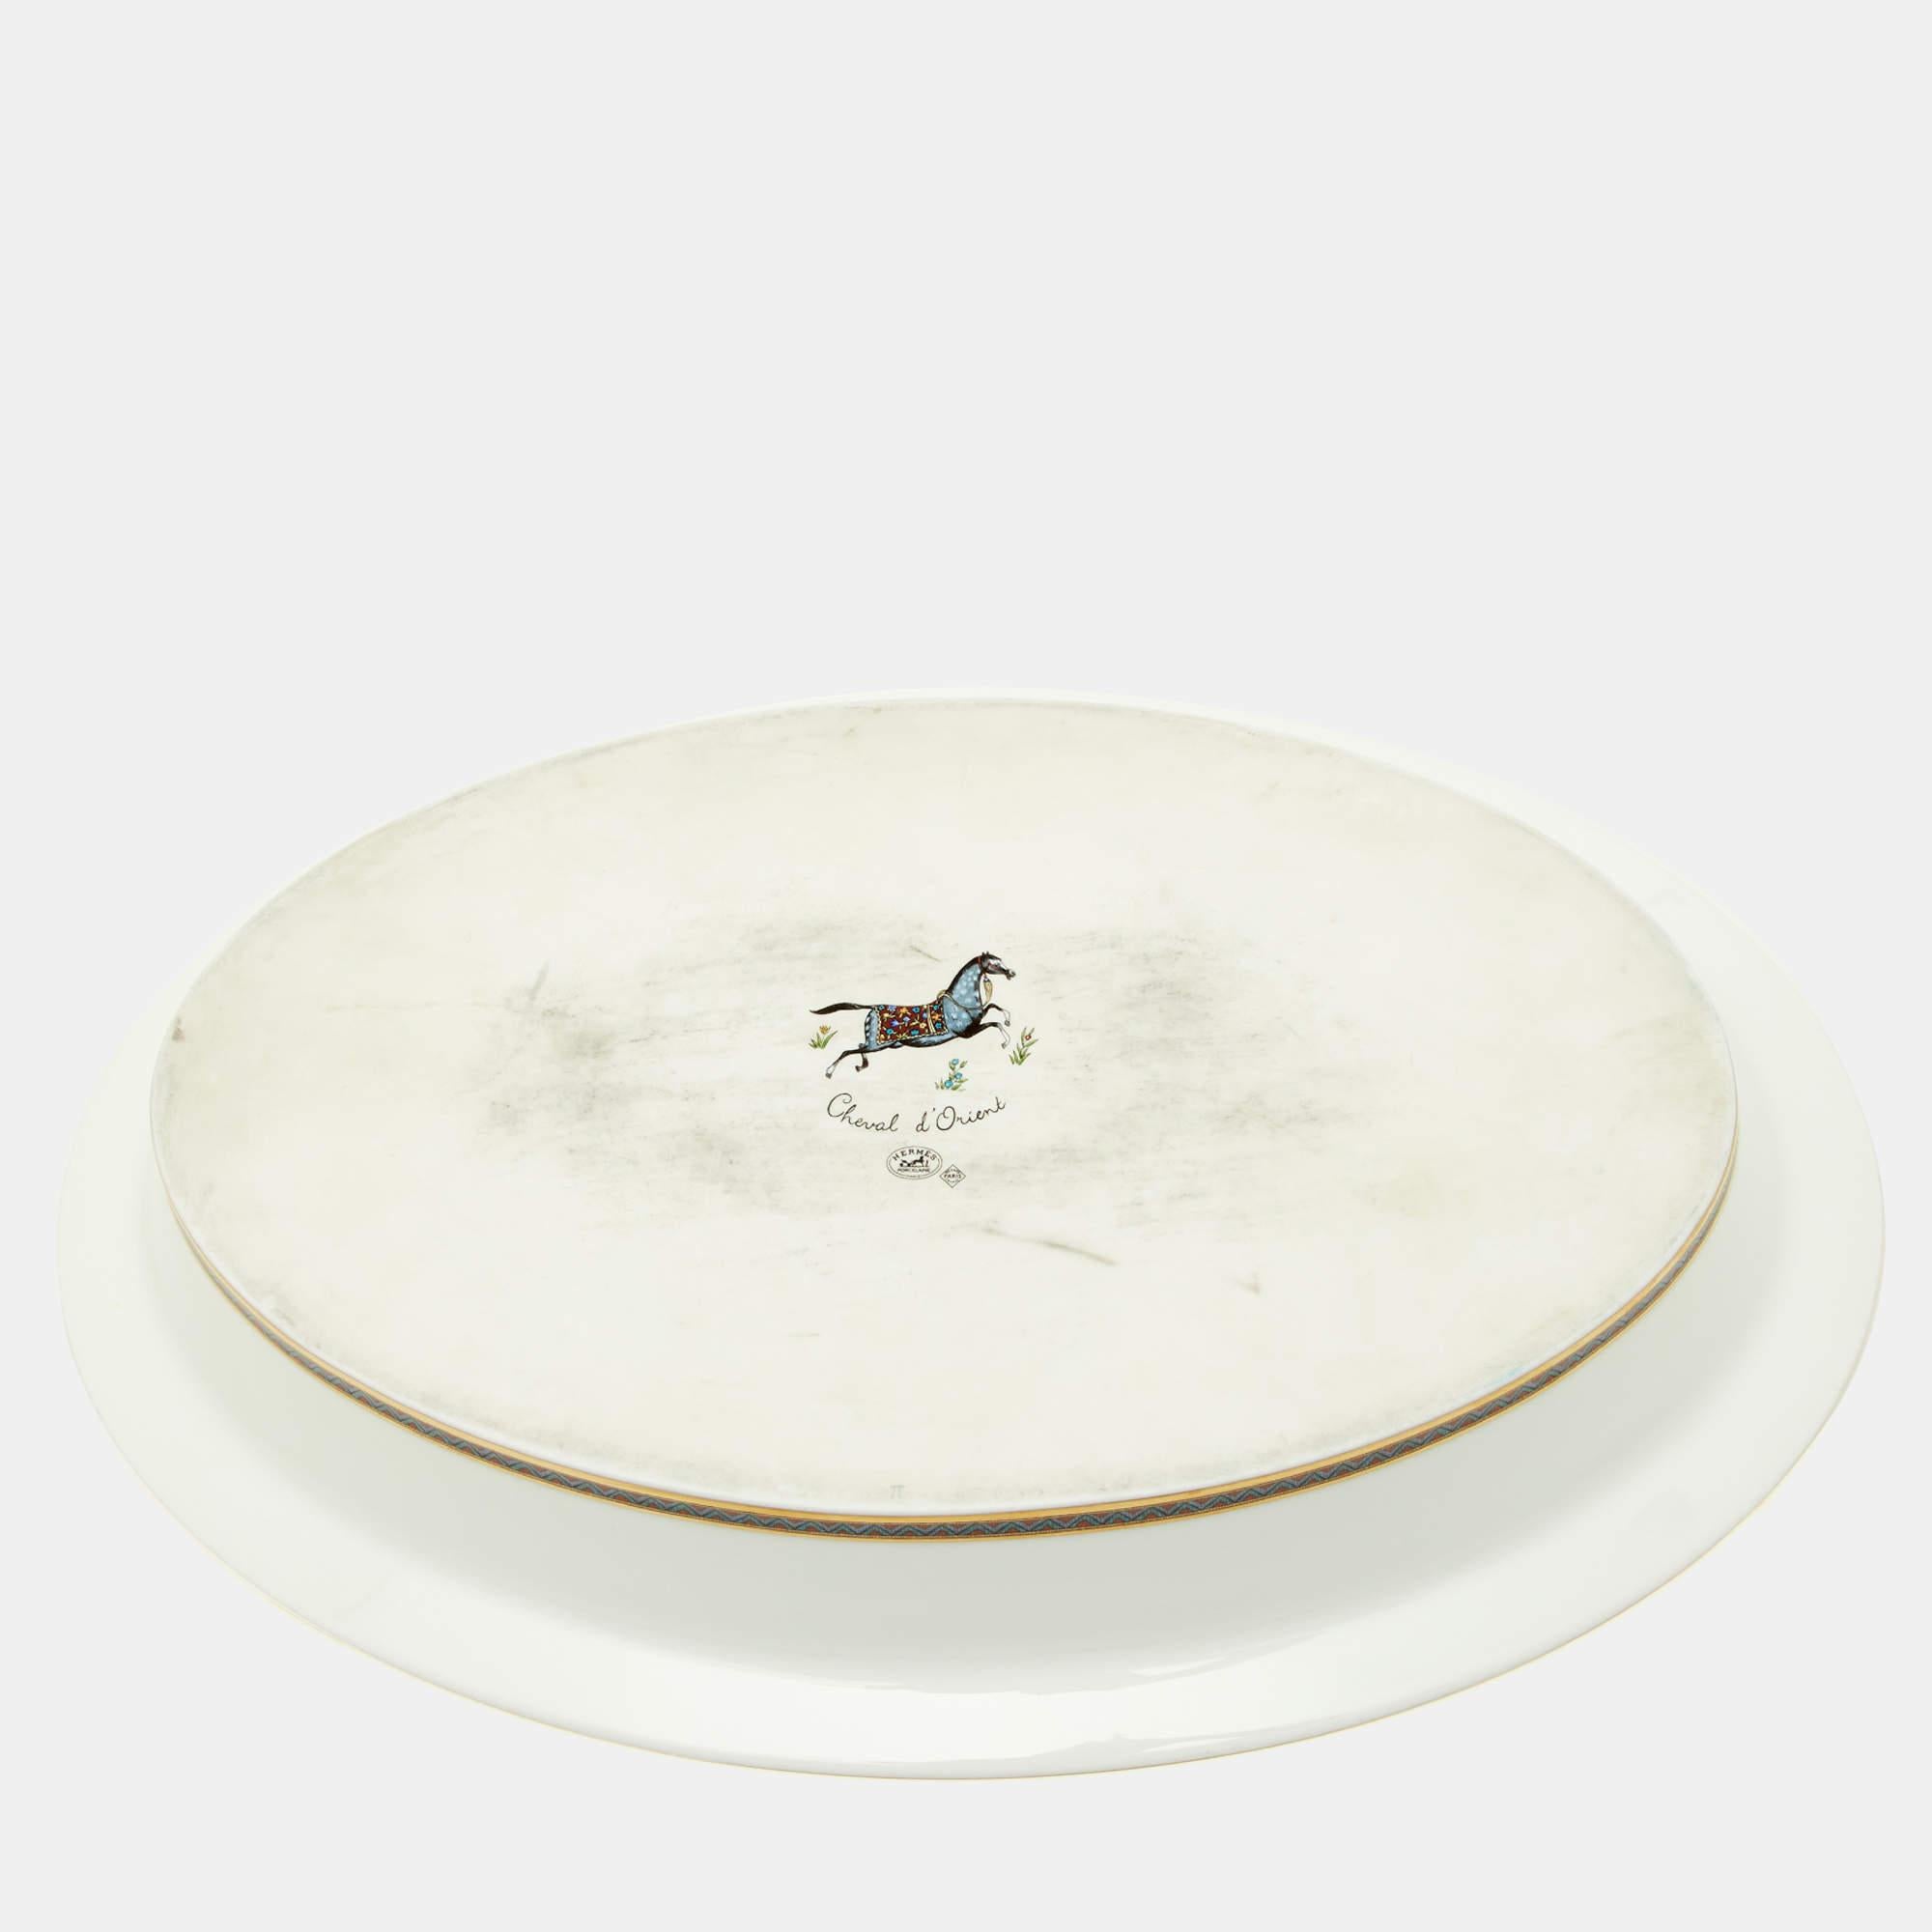 The Hermès Cheval d'Orient vegetable dish is an exquisite piece of tableware. Crafted from fine white porcelain, it features a delicate printed design inspired by oriental motifs. With its elegant and timeless aesthetic, this dish adds a touch of